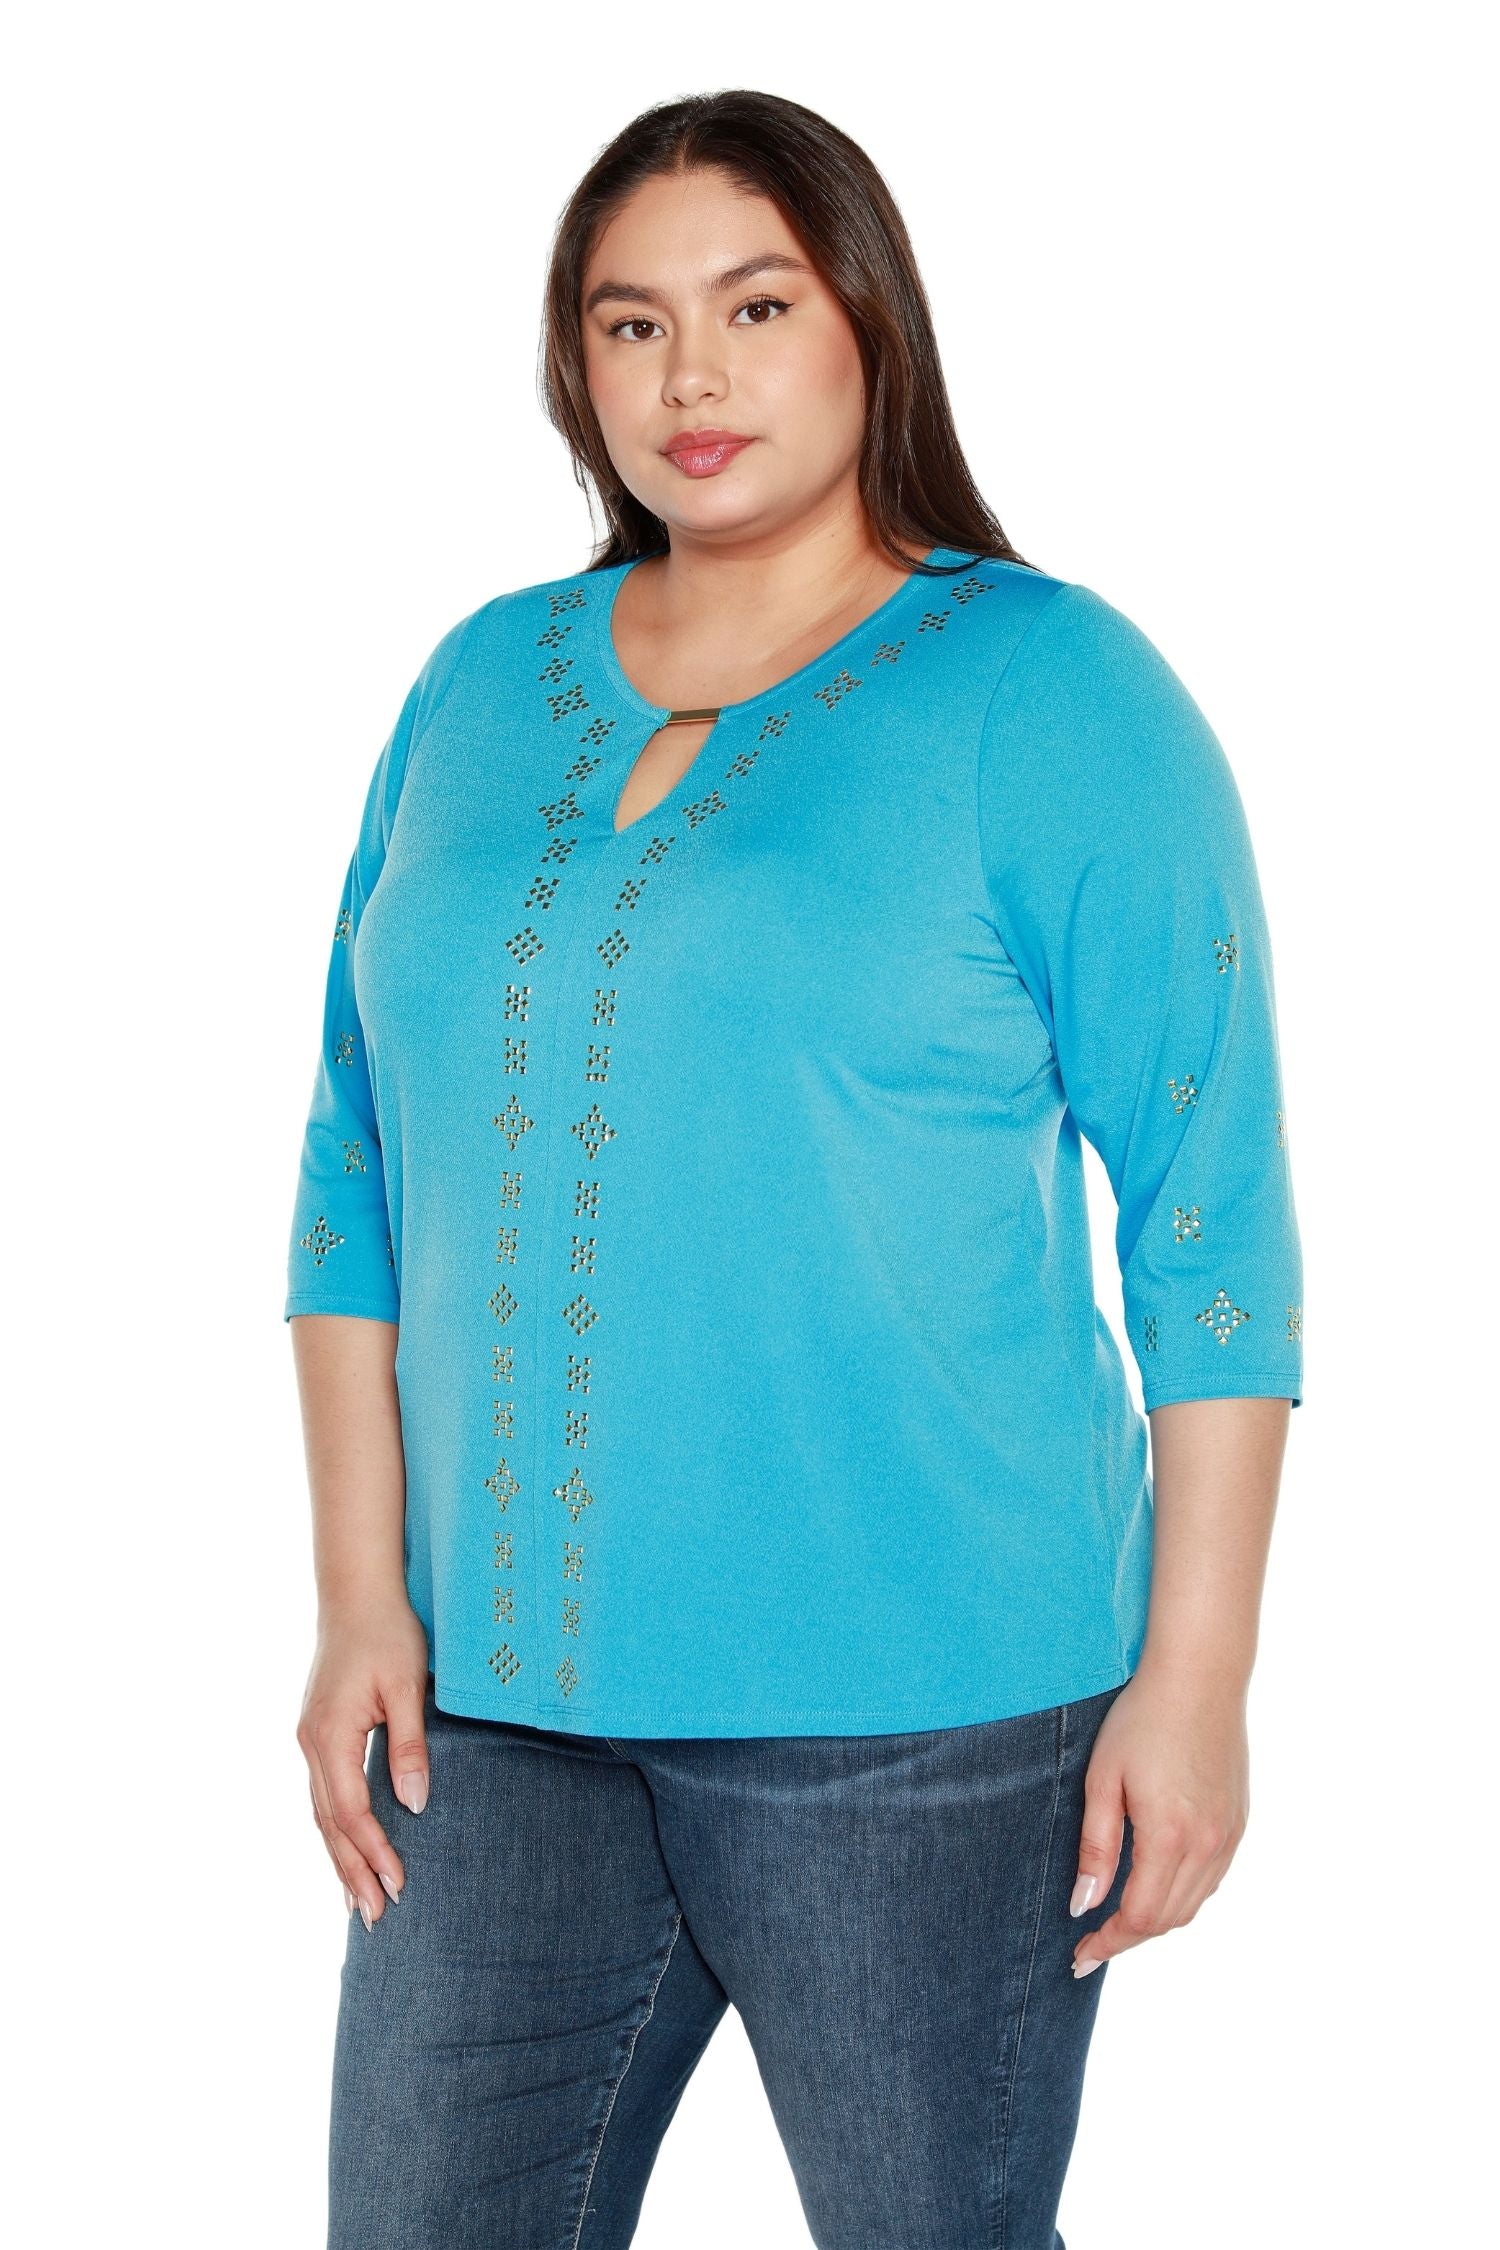 Women's Tunic with Gold Studs and Keyhole Neckline with Gold Bar | Curvy